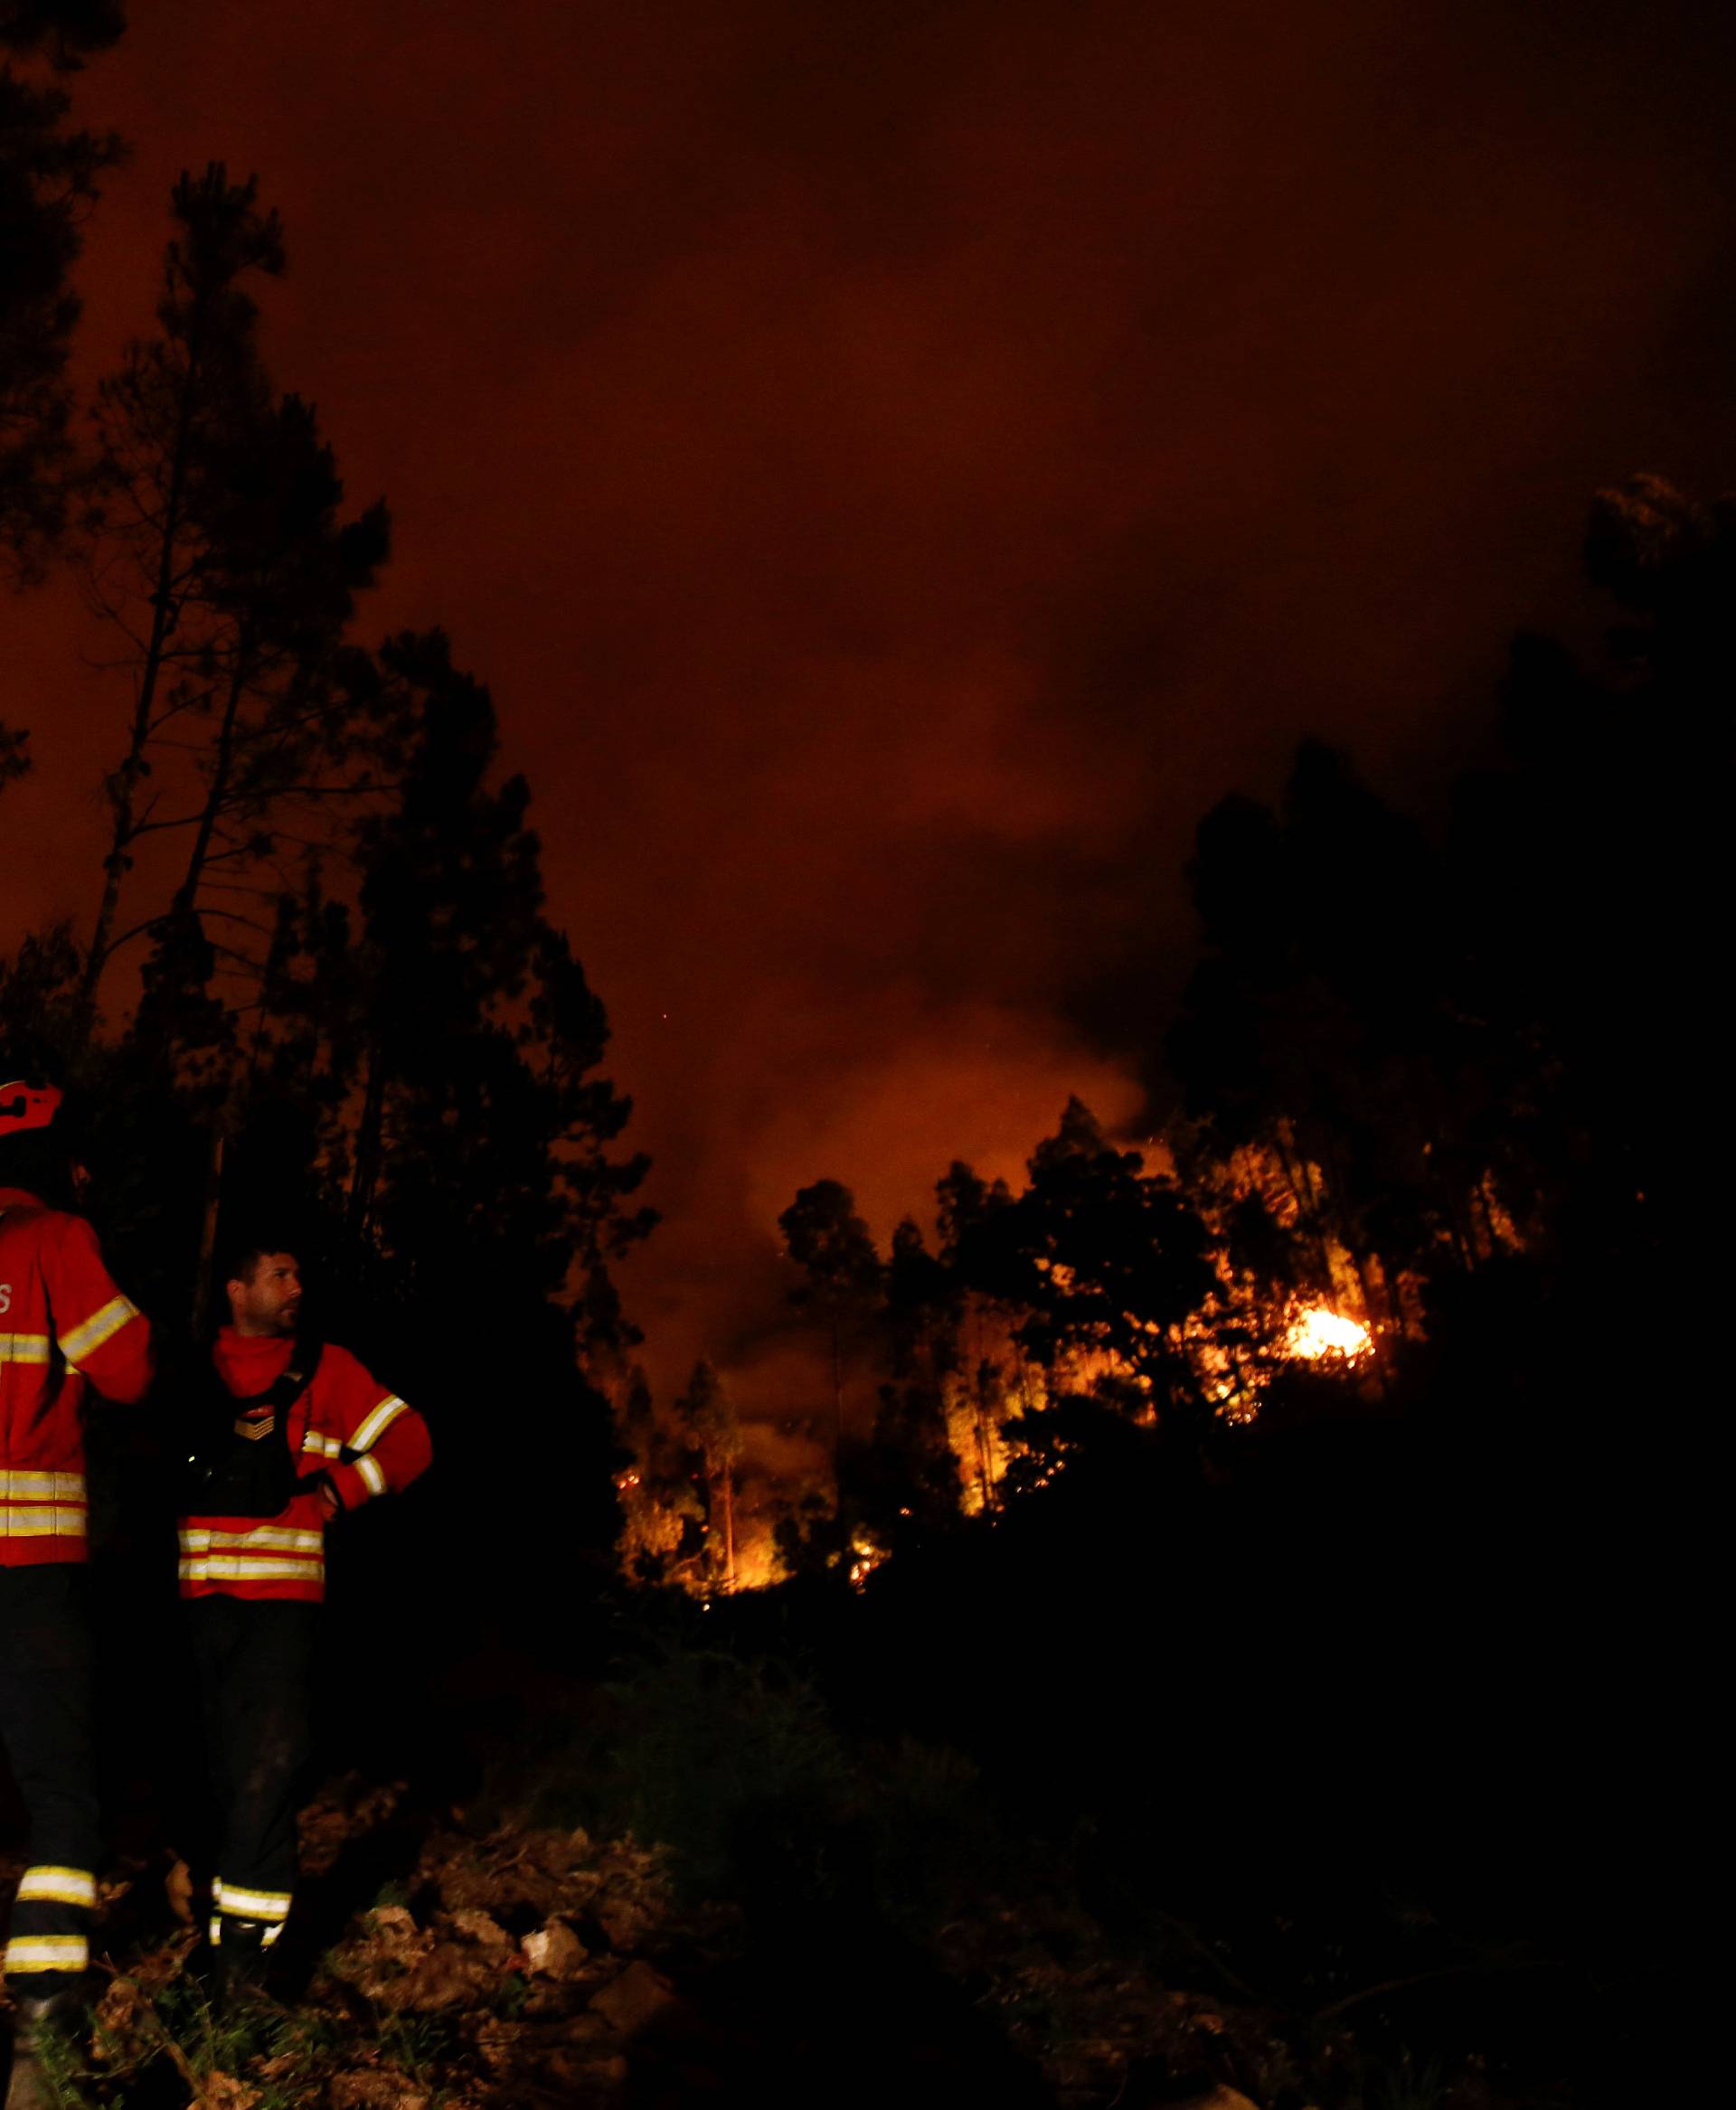 Firefighters work to put out a forest fire near Bouca in central Portugal